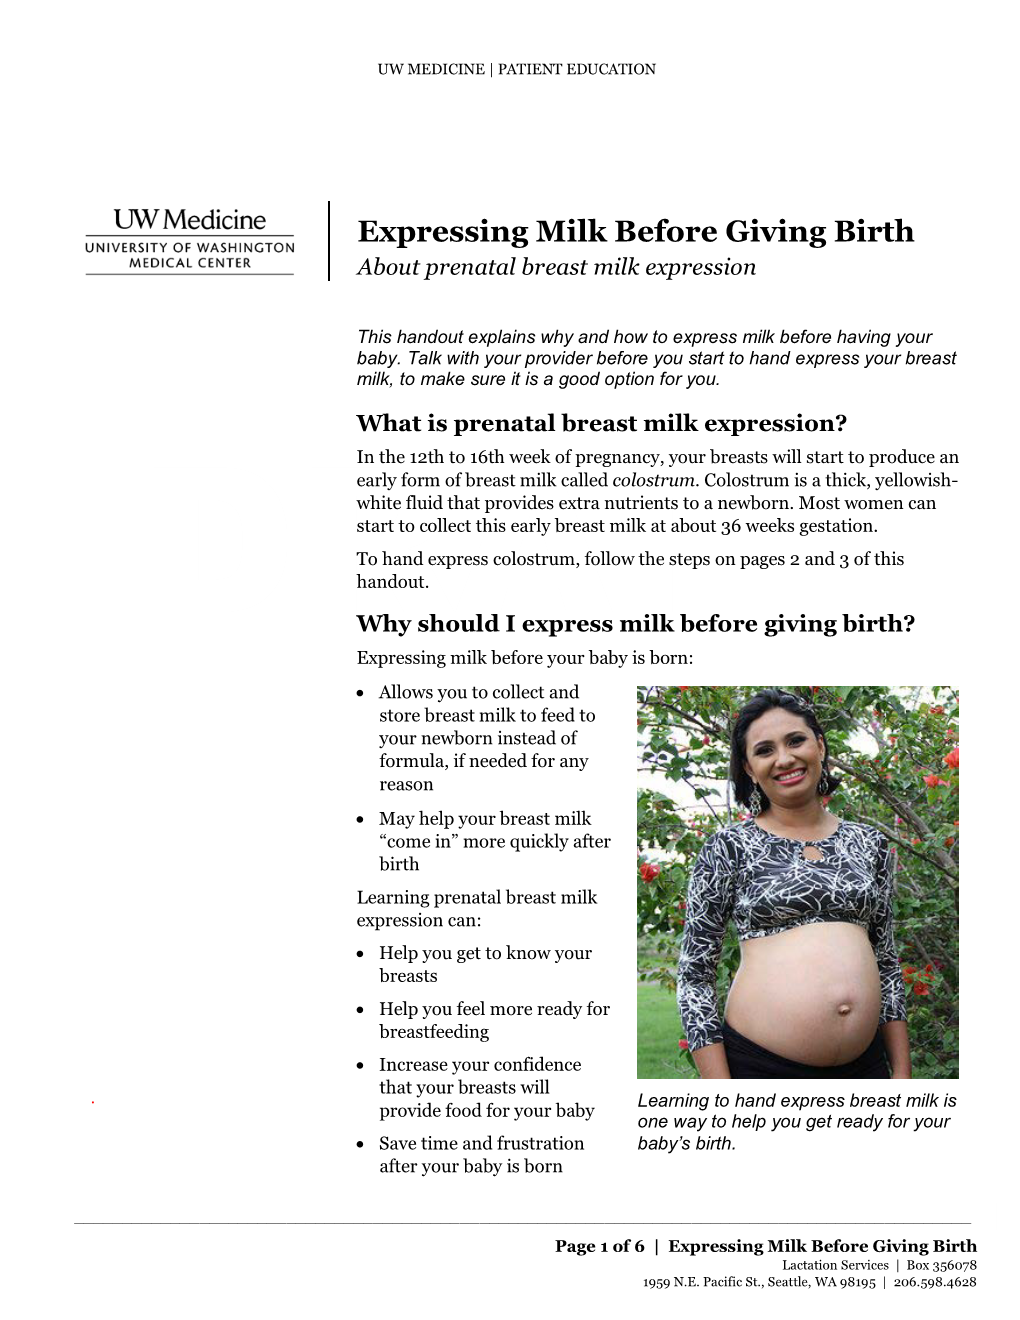 Expressing Milk Before Giving Birth | | About Prenatal Breast Milk Expression